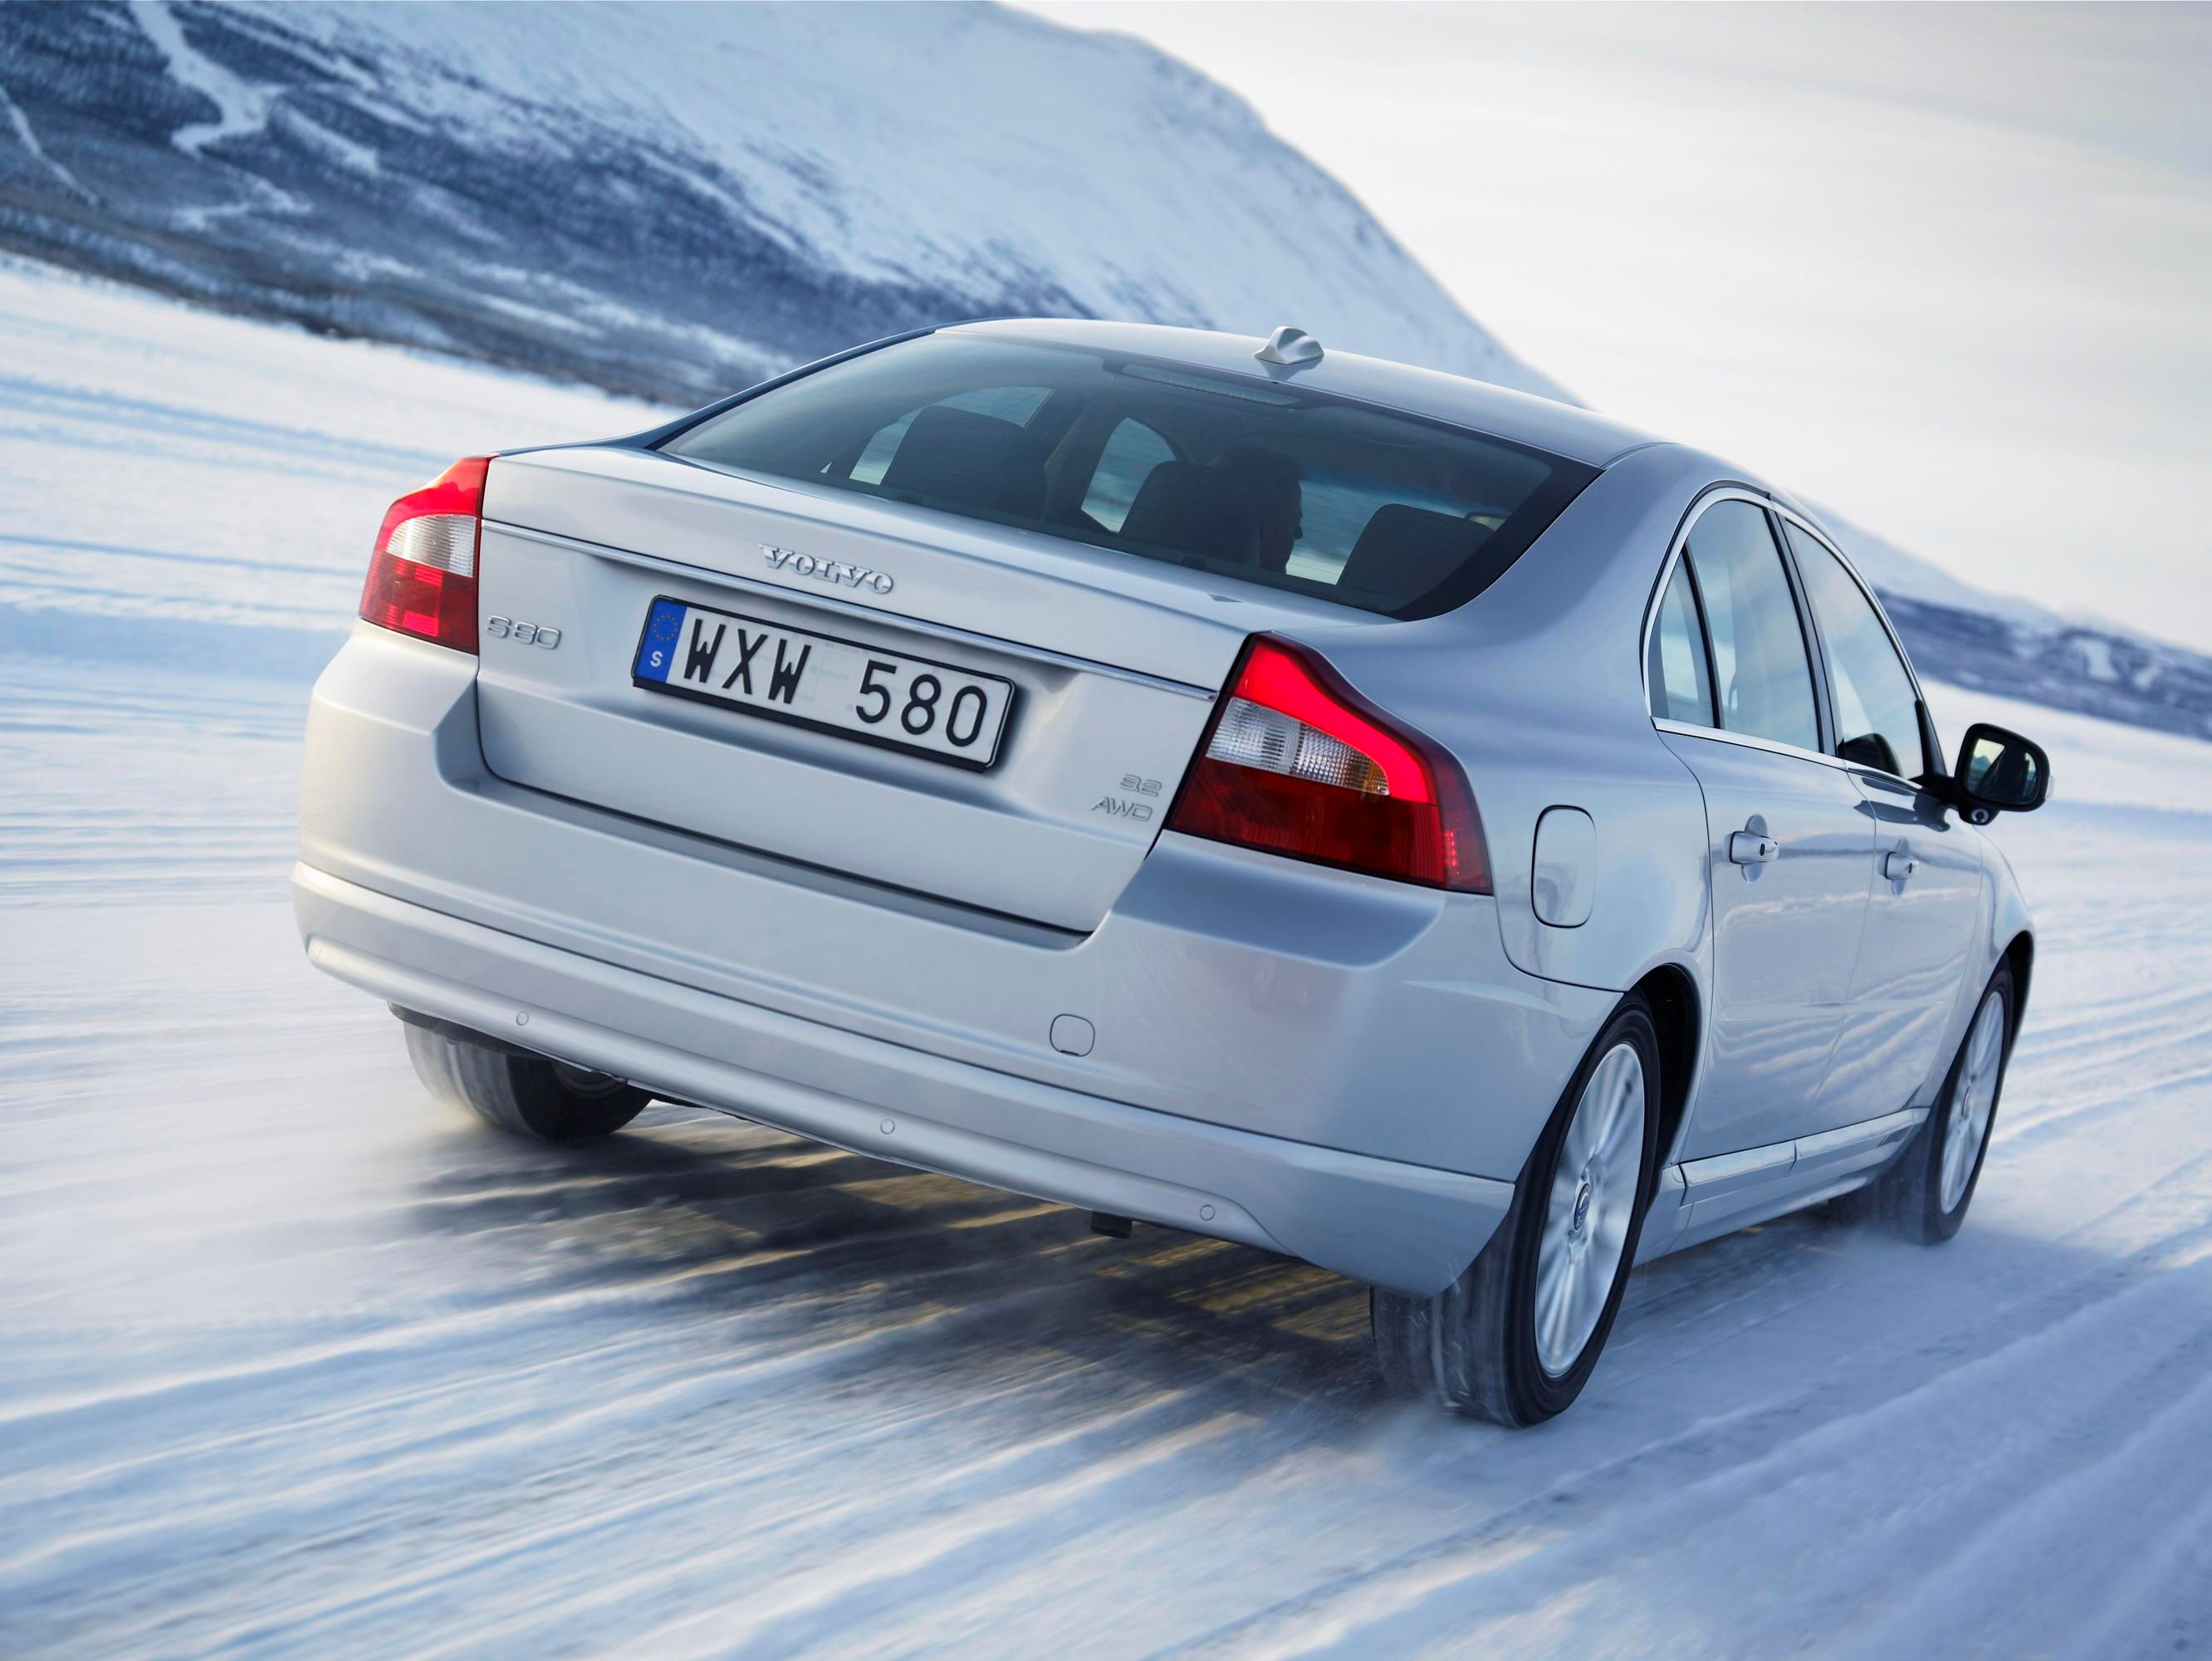 2008 Volvo XC70 and S80 Winter Edition